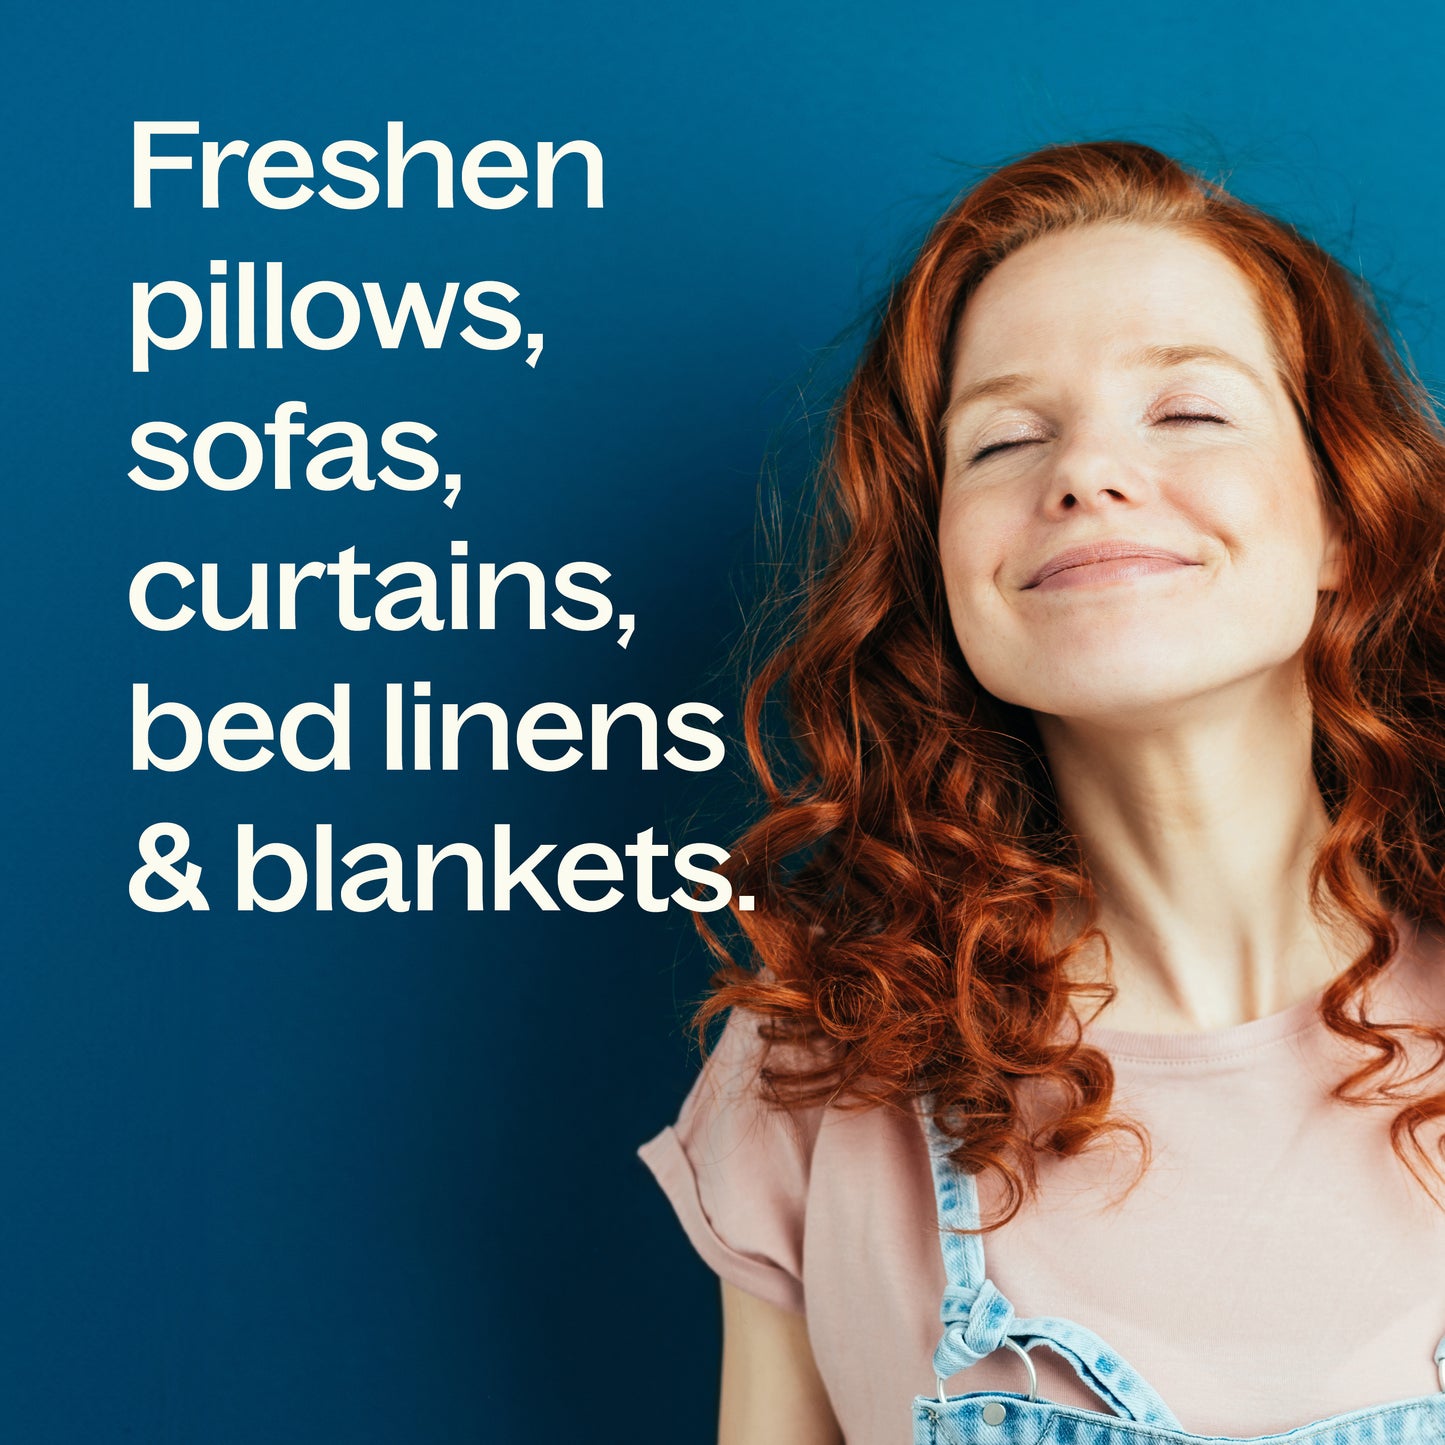 freshen pillows, sofas, curtains, bed linens and blankets